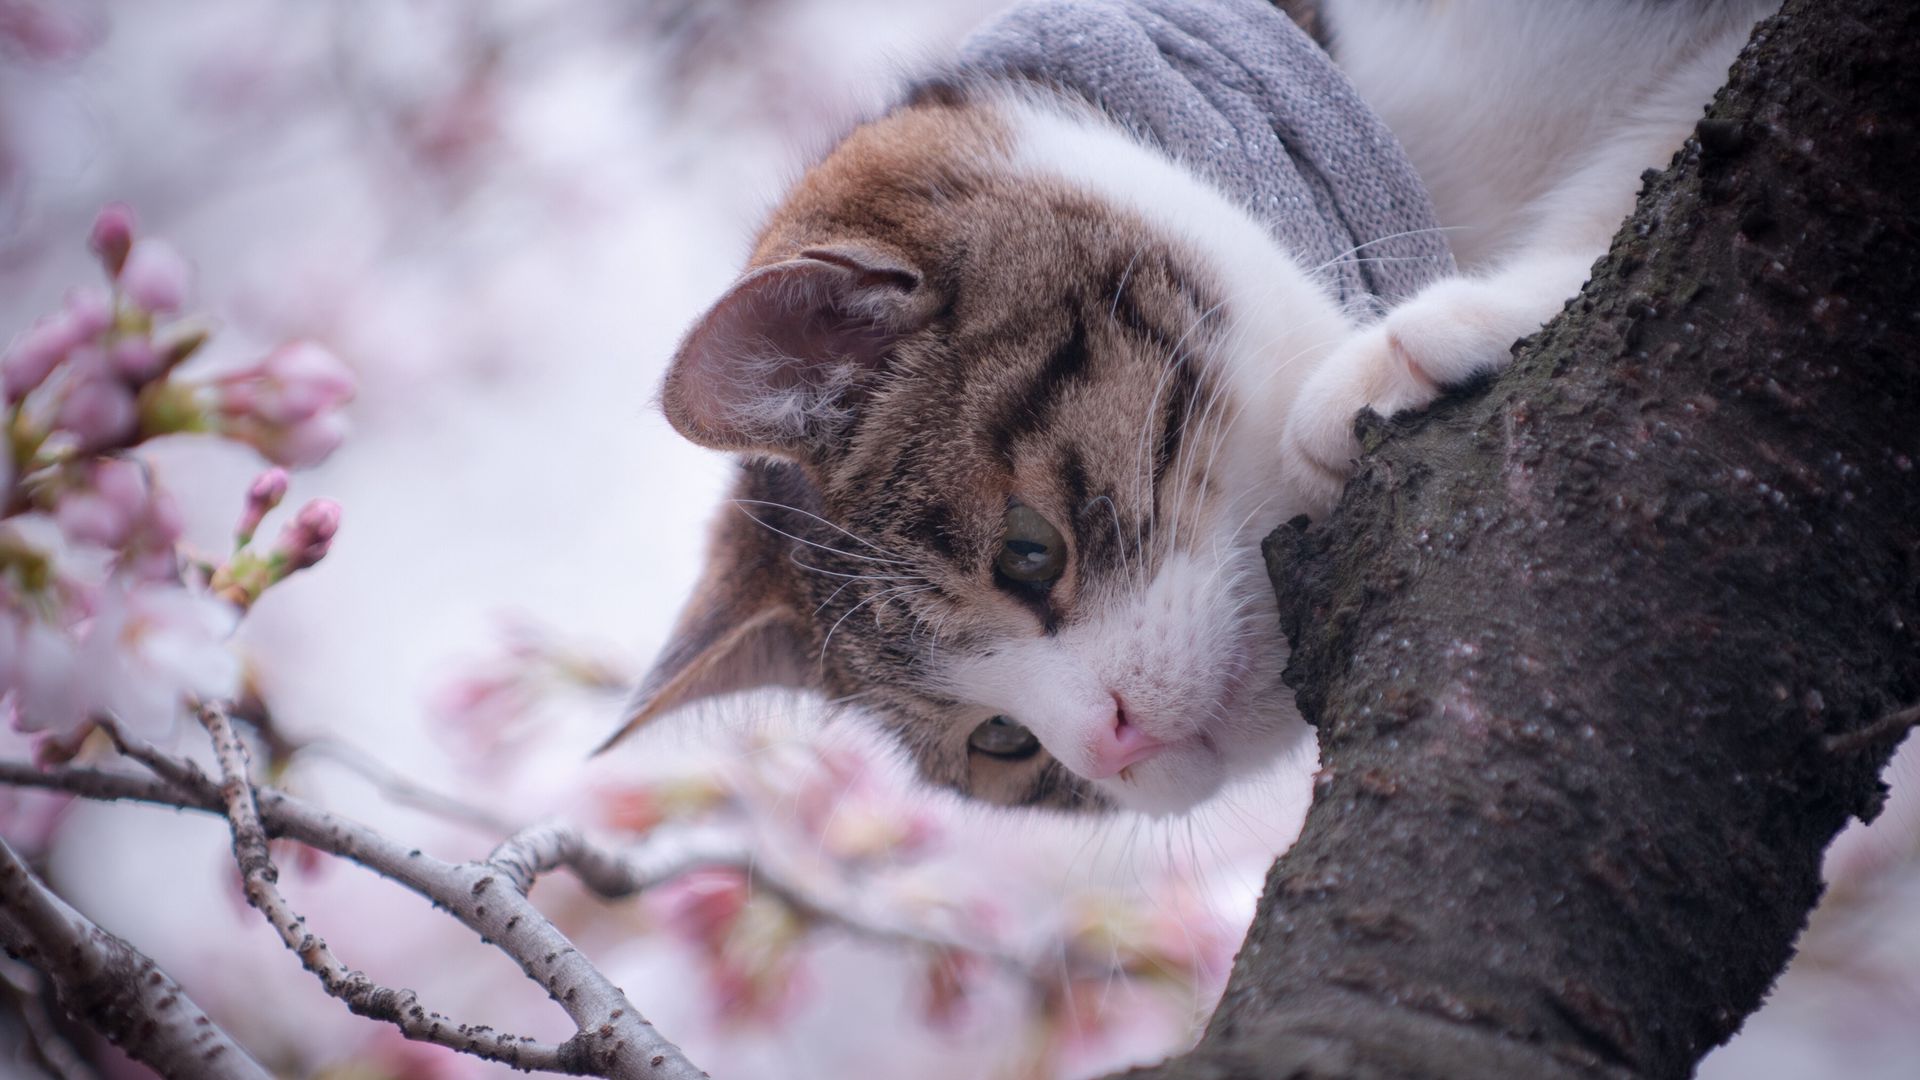 Download wallpaper 1920x1080 cat, tree, spring full hd, hdtv, fhd, 1080p HD background